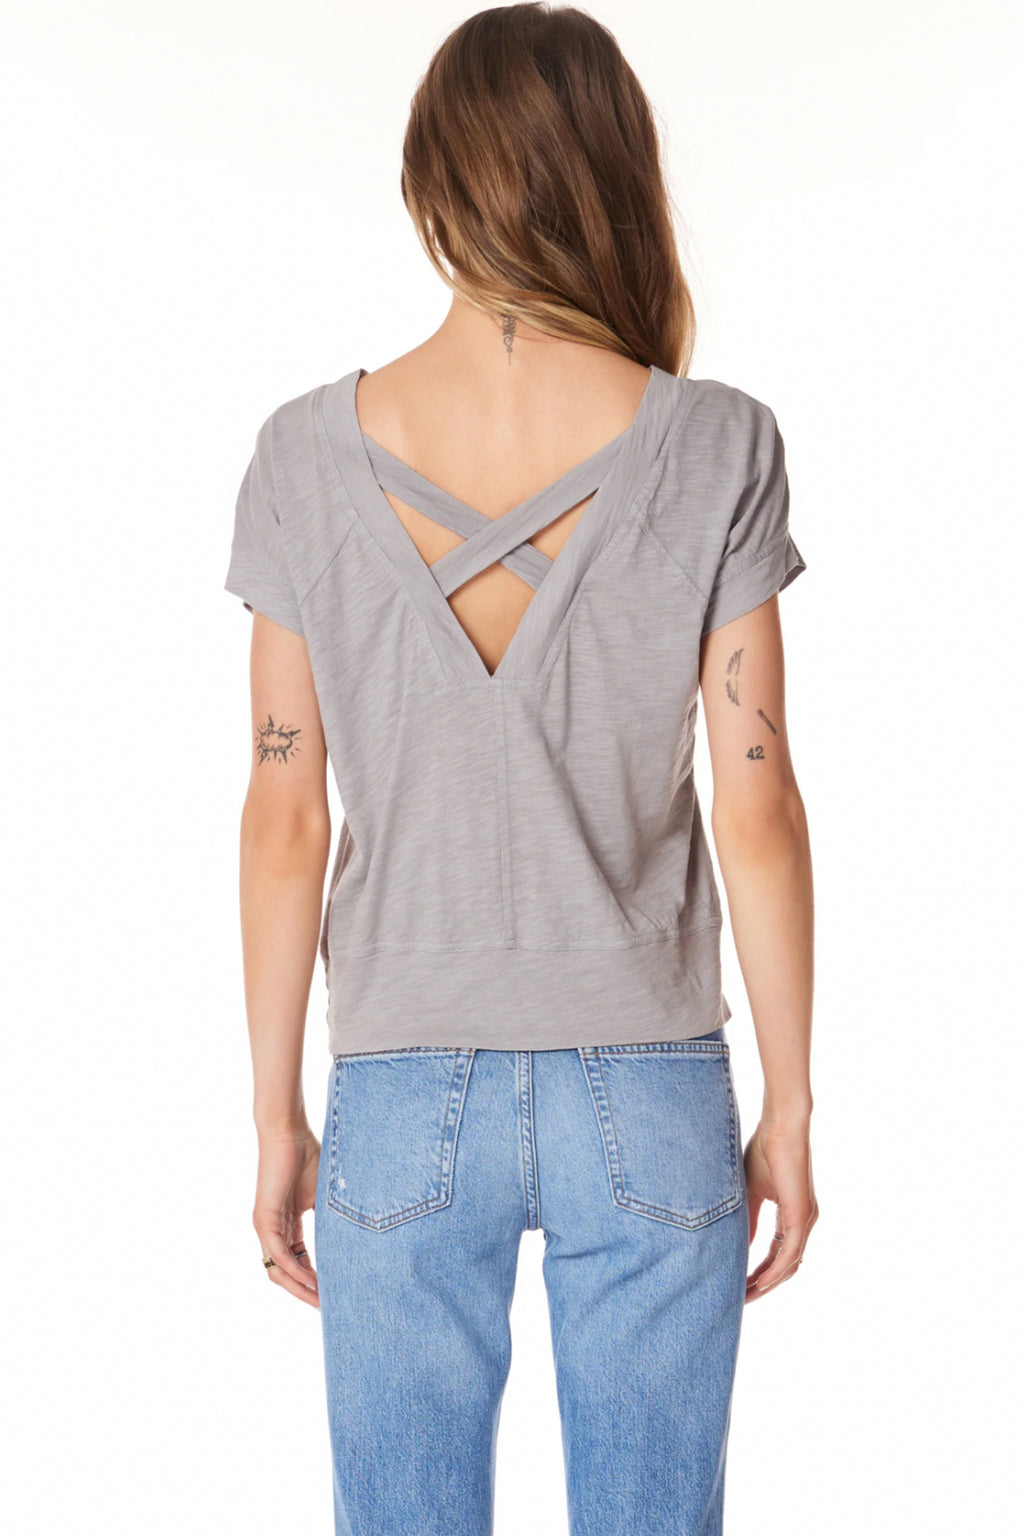 Boatneck Raglan With Back Cut Out